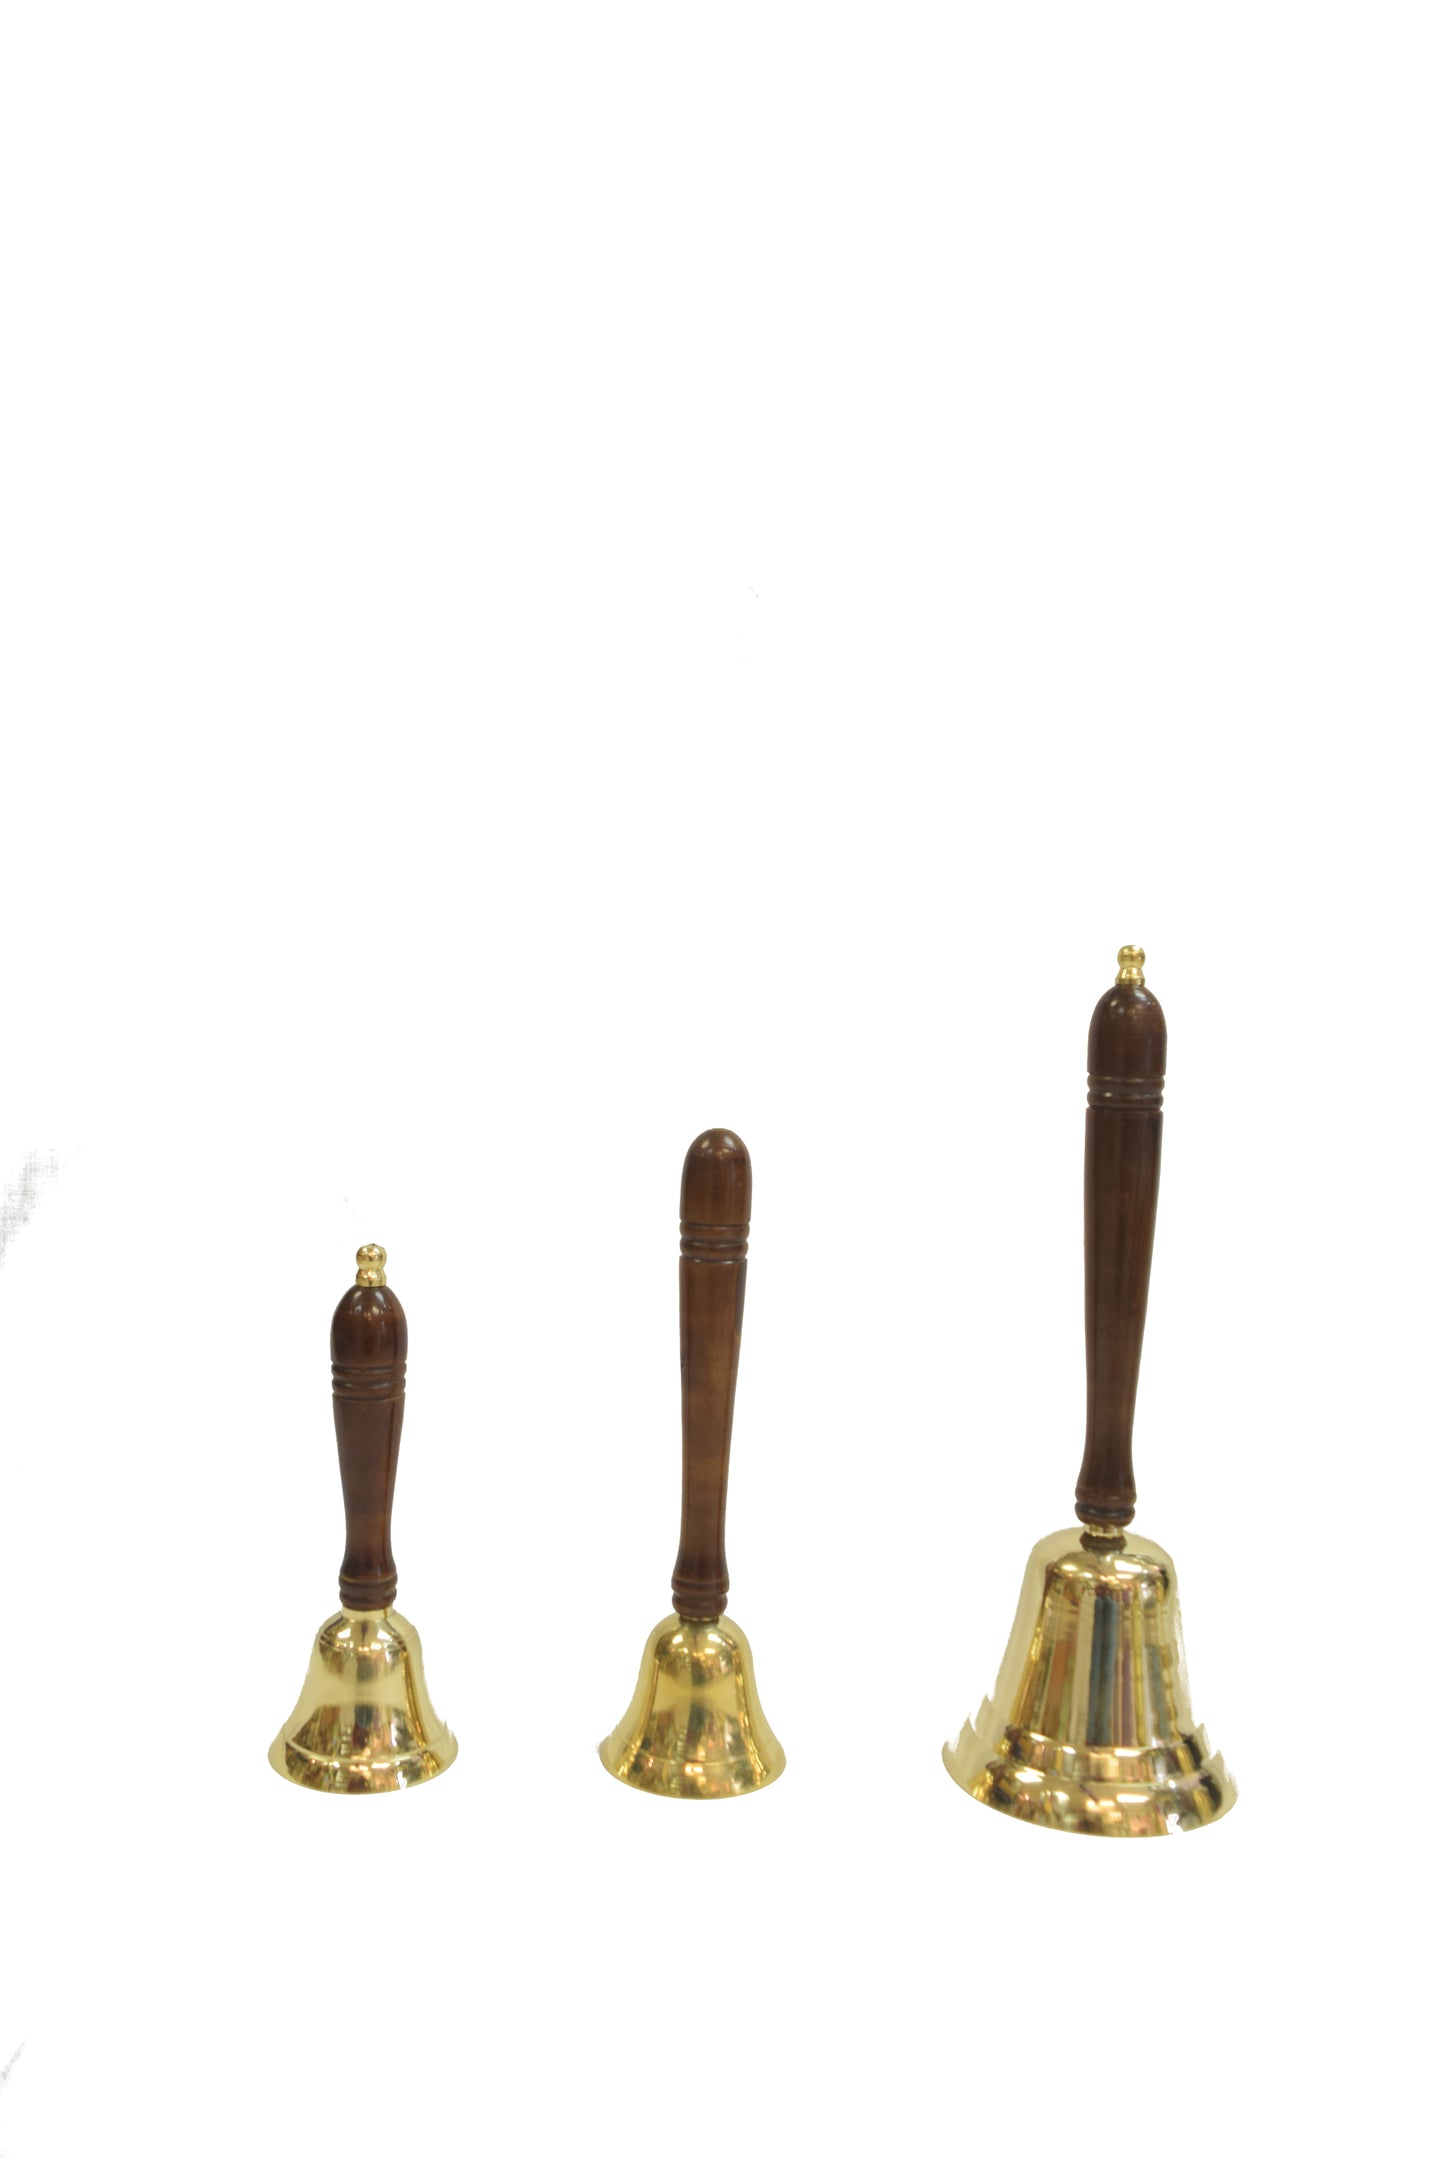 Bells with Long Wooden Handle